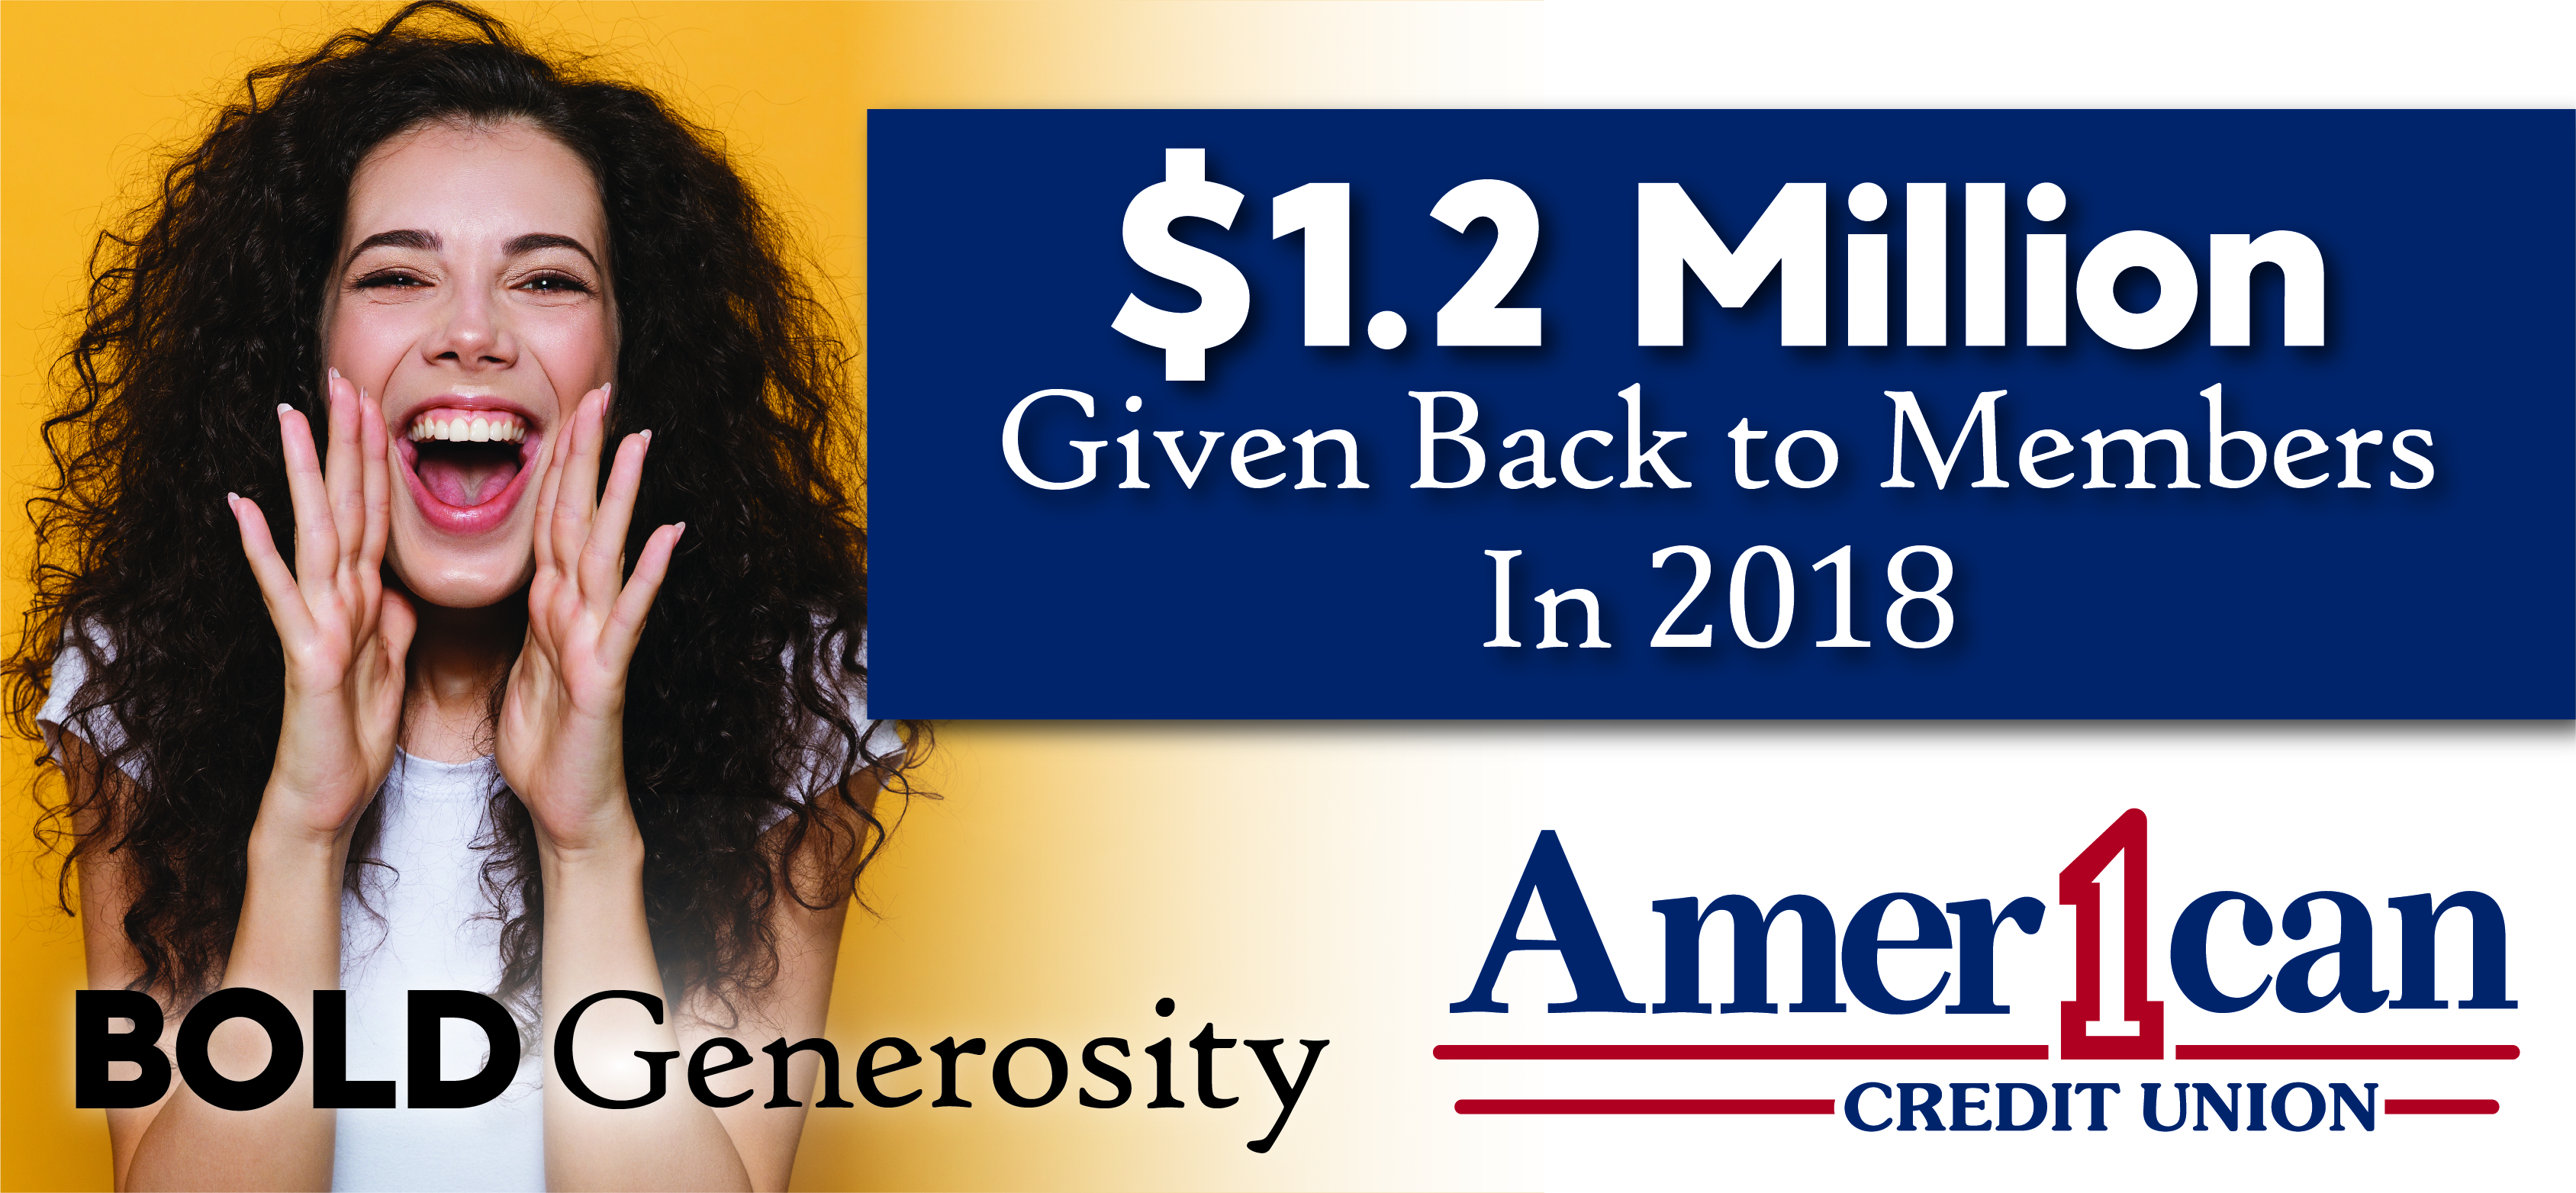 American 1 gives back $1.2 million dollars to members in 2018!